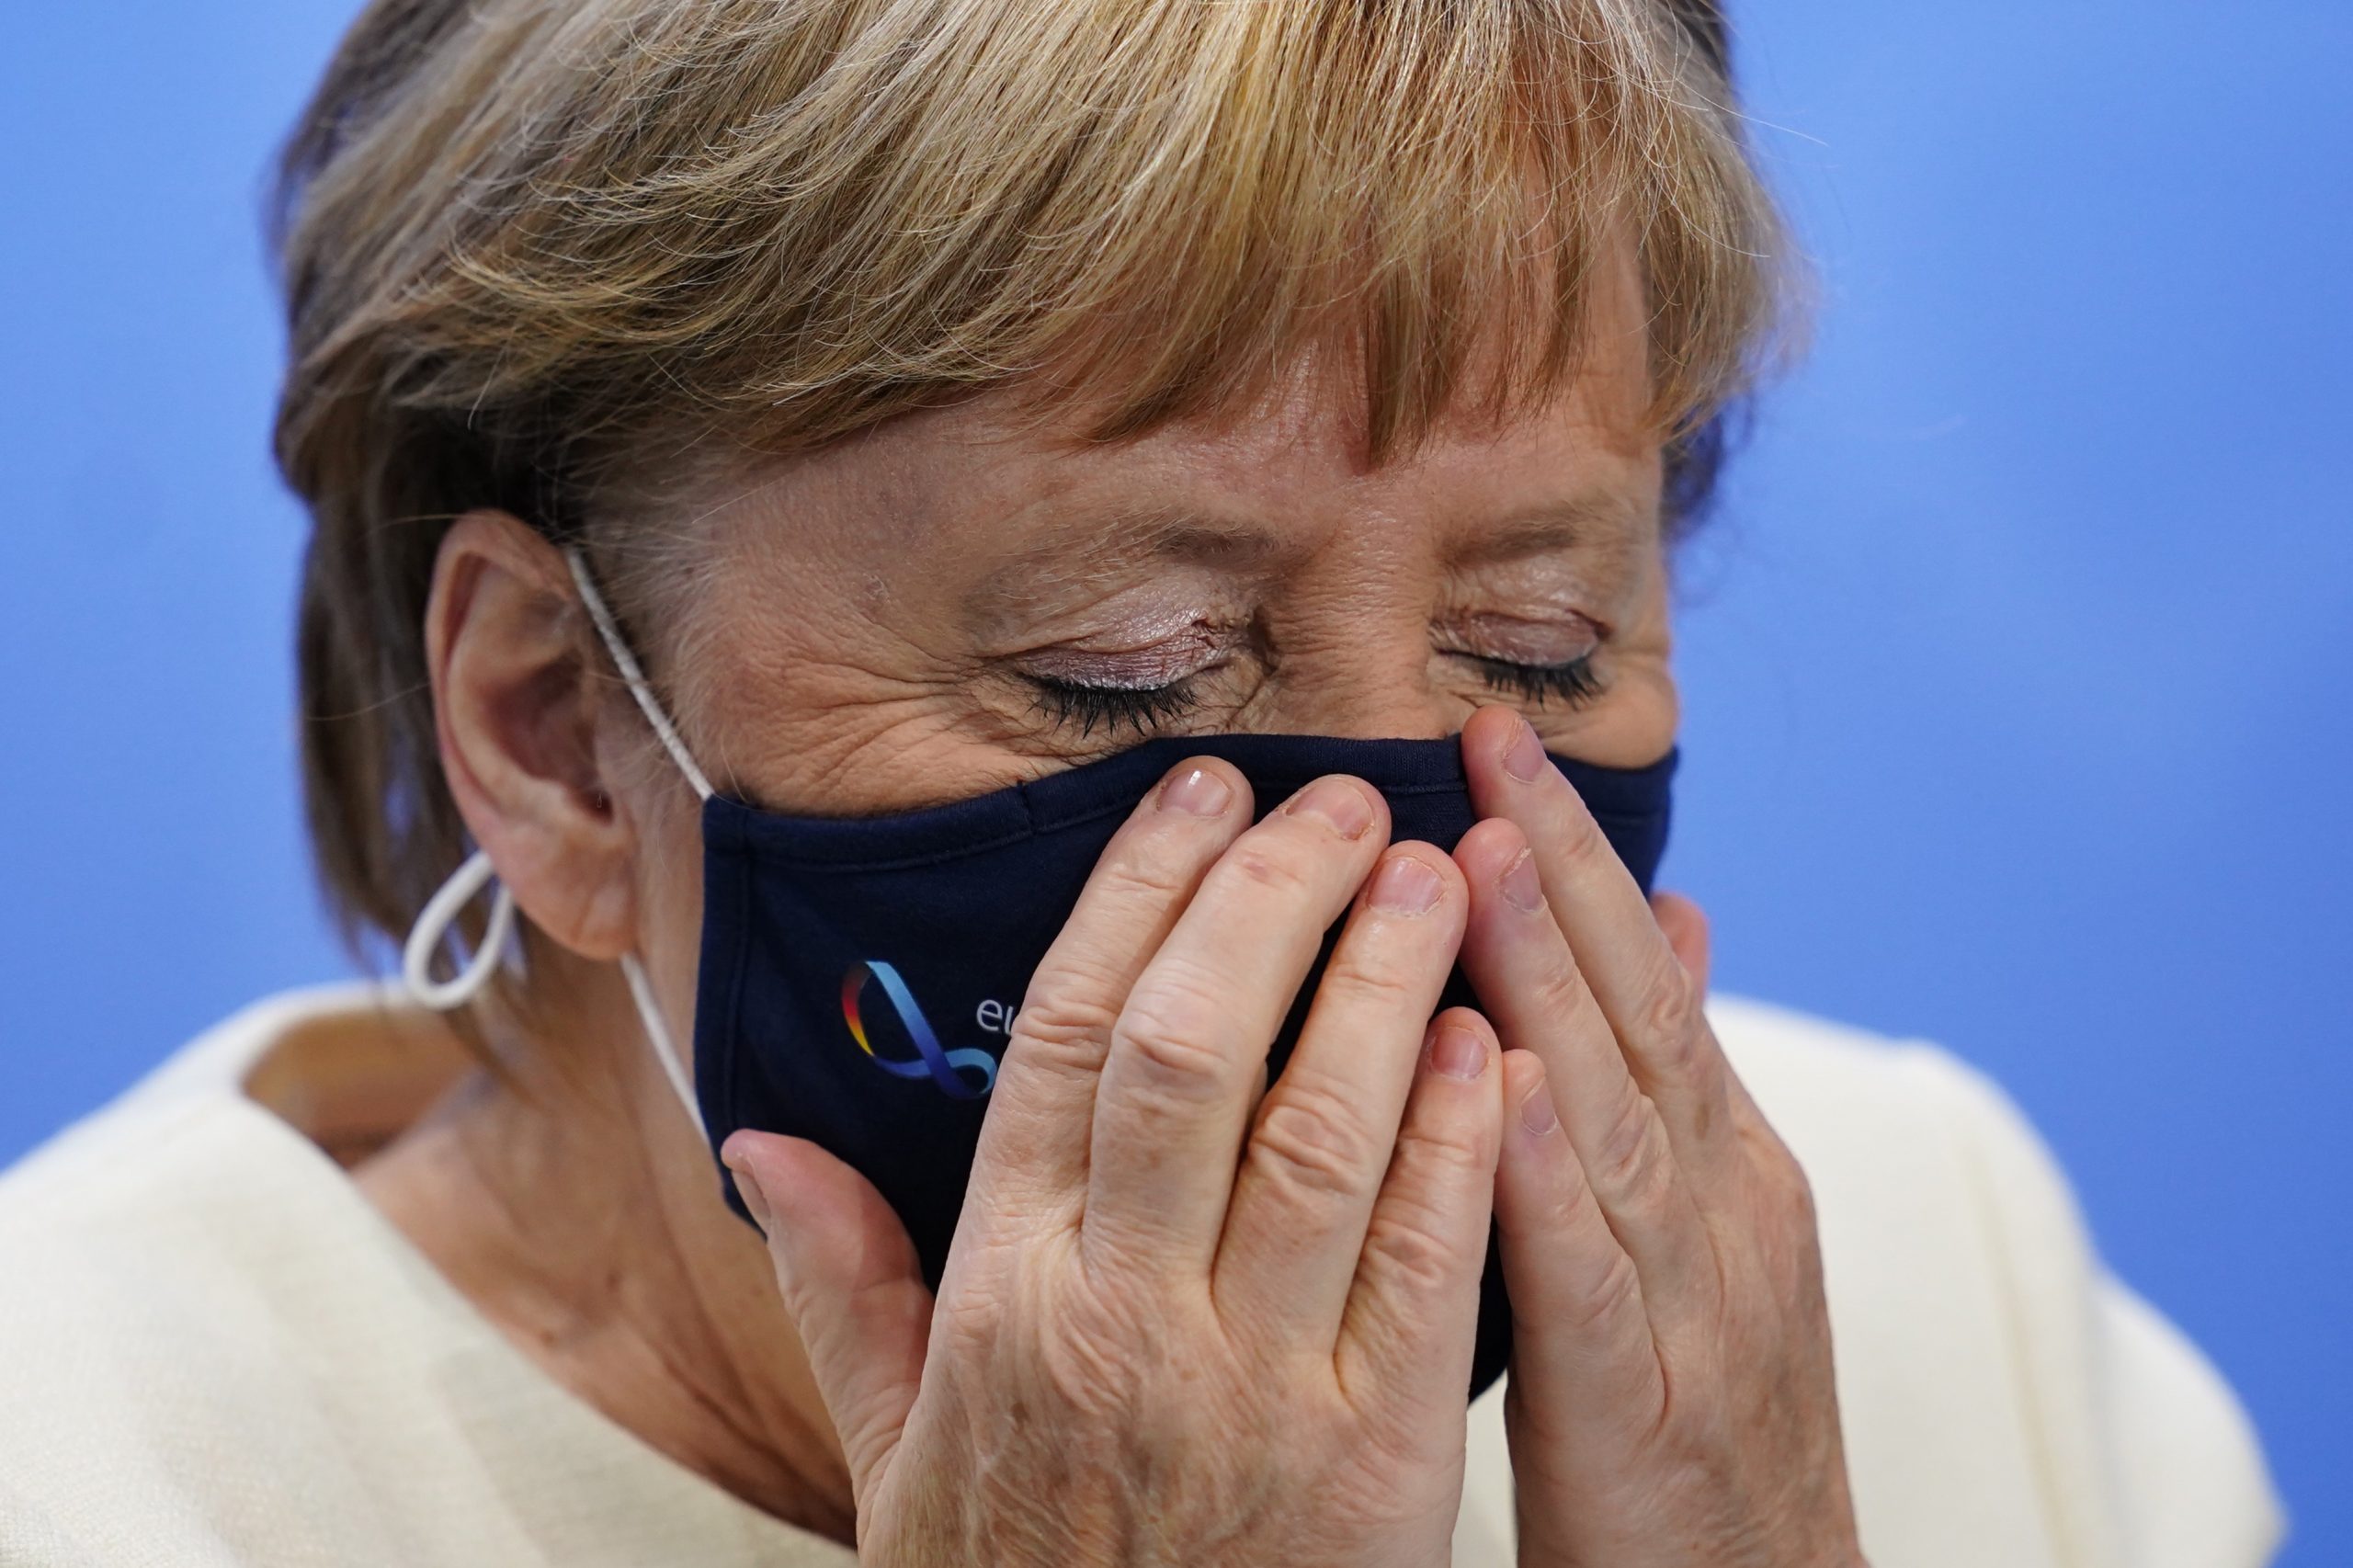 epa08706232 German Chancellor Angela Merkel puts on her face mask after a press conference after the meeting of German Federal State Premiers at the Chancellery in Berlin, Germany, 29 September 2020. The German Prime Ministerial Conference took place earlier in the day in Berlin to discuss the current coronavirus situation and possible change of measures.  EPA/CLEMENS BILAN / POOL